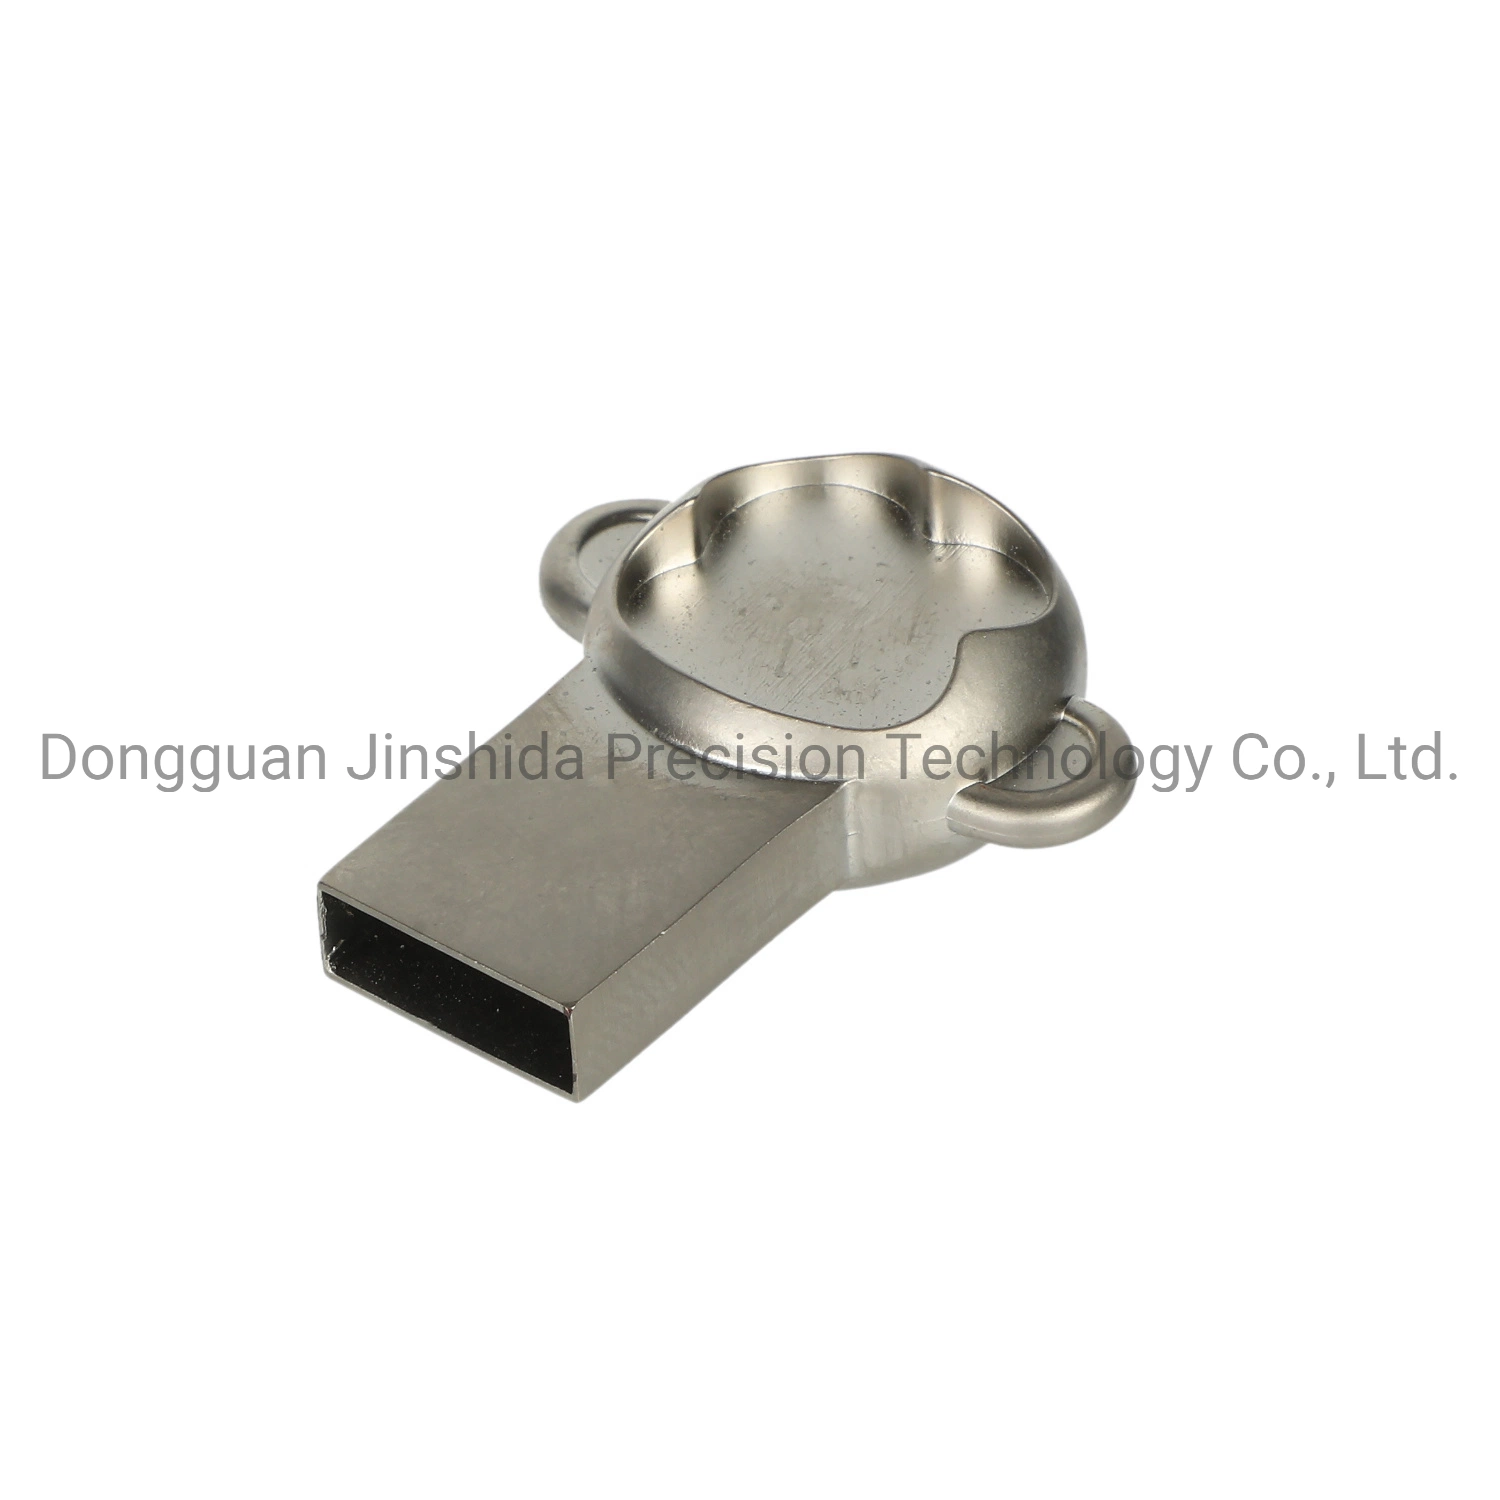 OEM/ODM Die Casting Part U Disk and Data Cable Connector